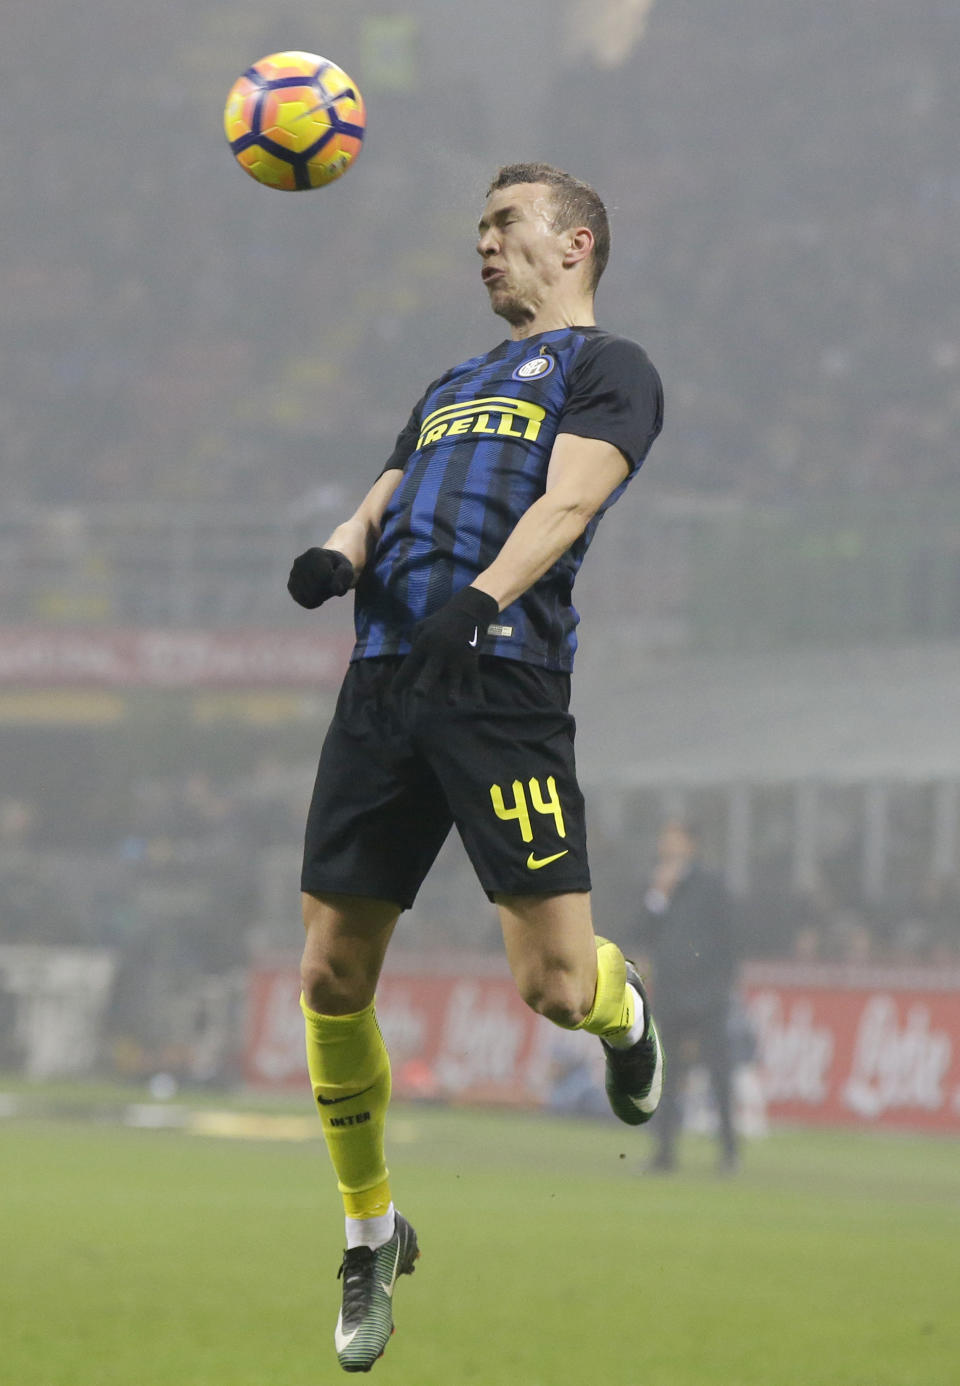 Inter Milan's Ivan Perisic jumps for the ball during an Italian Cup quarterfinal soccer match between Inter Milan and Lazio, at the San Siro stadium in Milan, Italy, Tuesday, Jan. 31, 2017. (AP Photo/Luca Bruno)